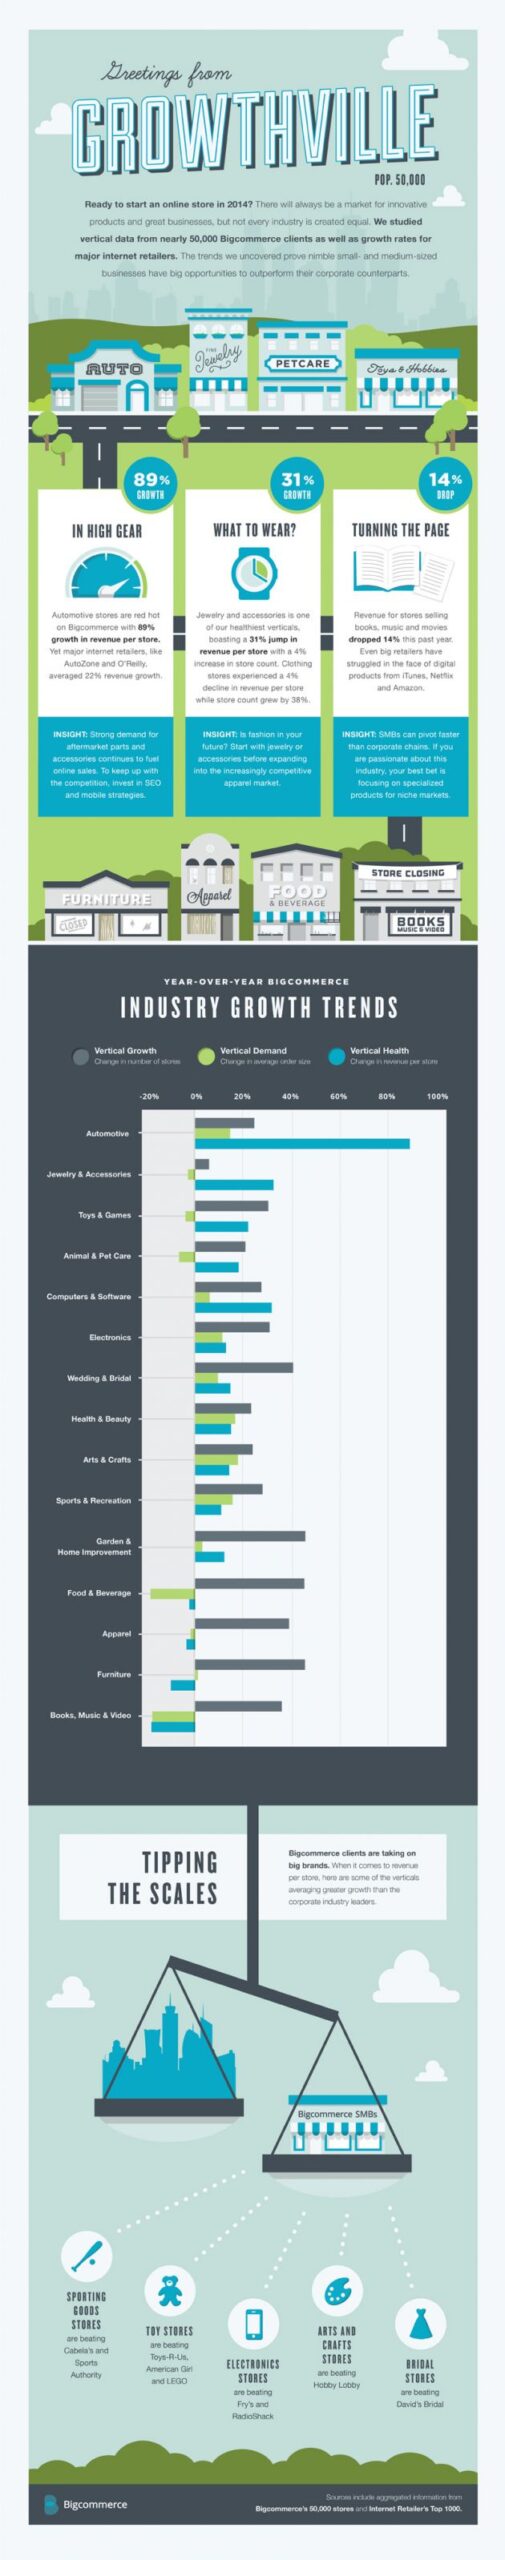 most-profitable-ecommerce-product-categories-infographic